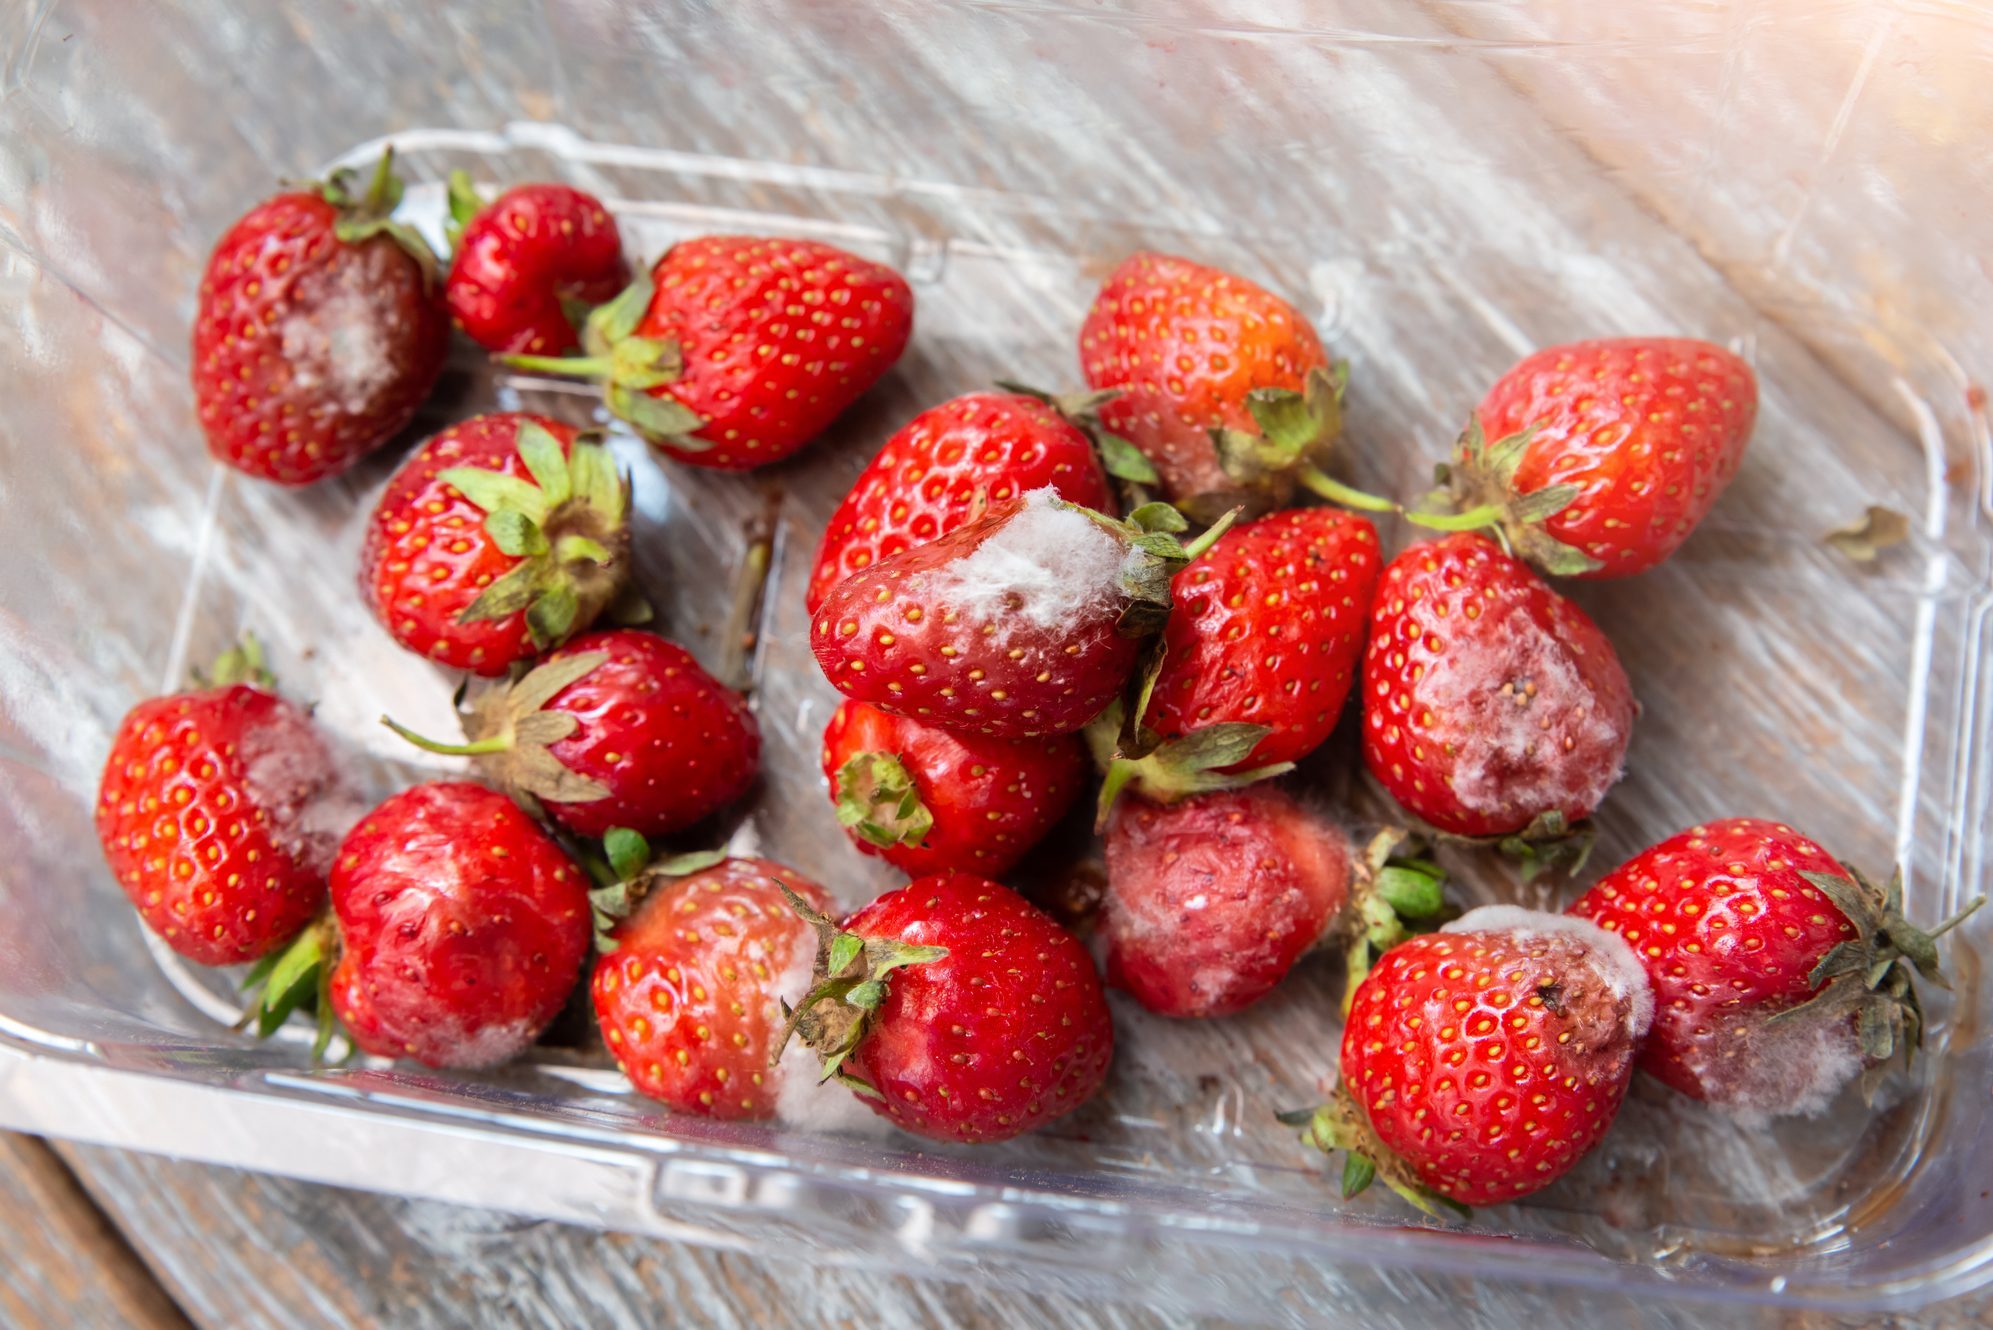 Is It OK to Eat Moldy Strawberries? What Will Happen?